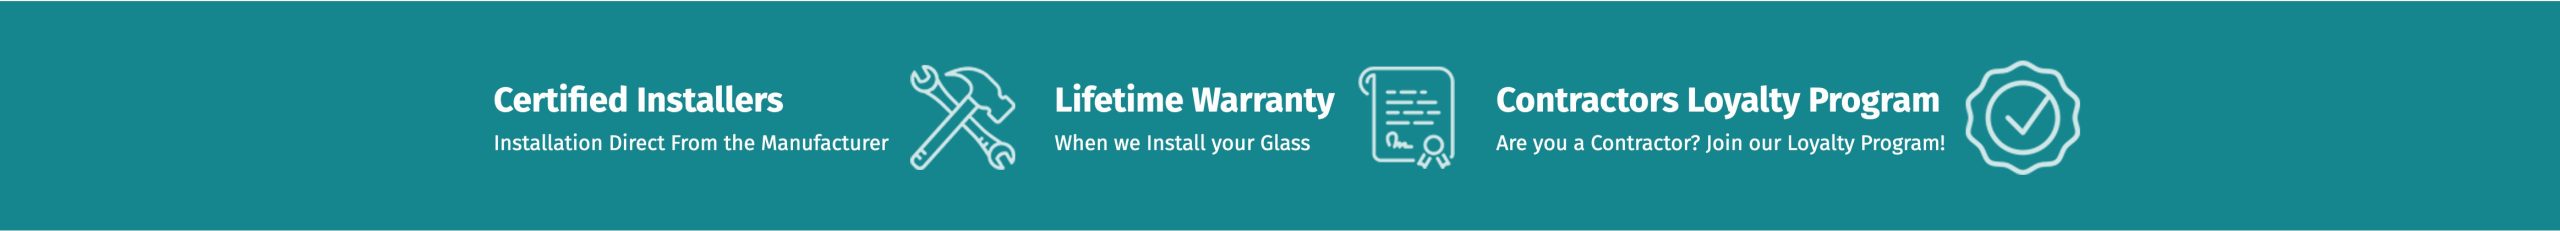 <br />
Certified Installers<br />
Installation Direct From the Manufacturer |<br />
Lifetime Warranty<br />
When we Install your Glass |<br />
Contractors Loyalty Program<br />
Are you a Contractor? Join our Loyalty Program!</p>
<p>